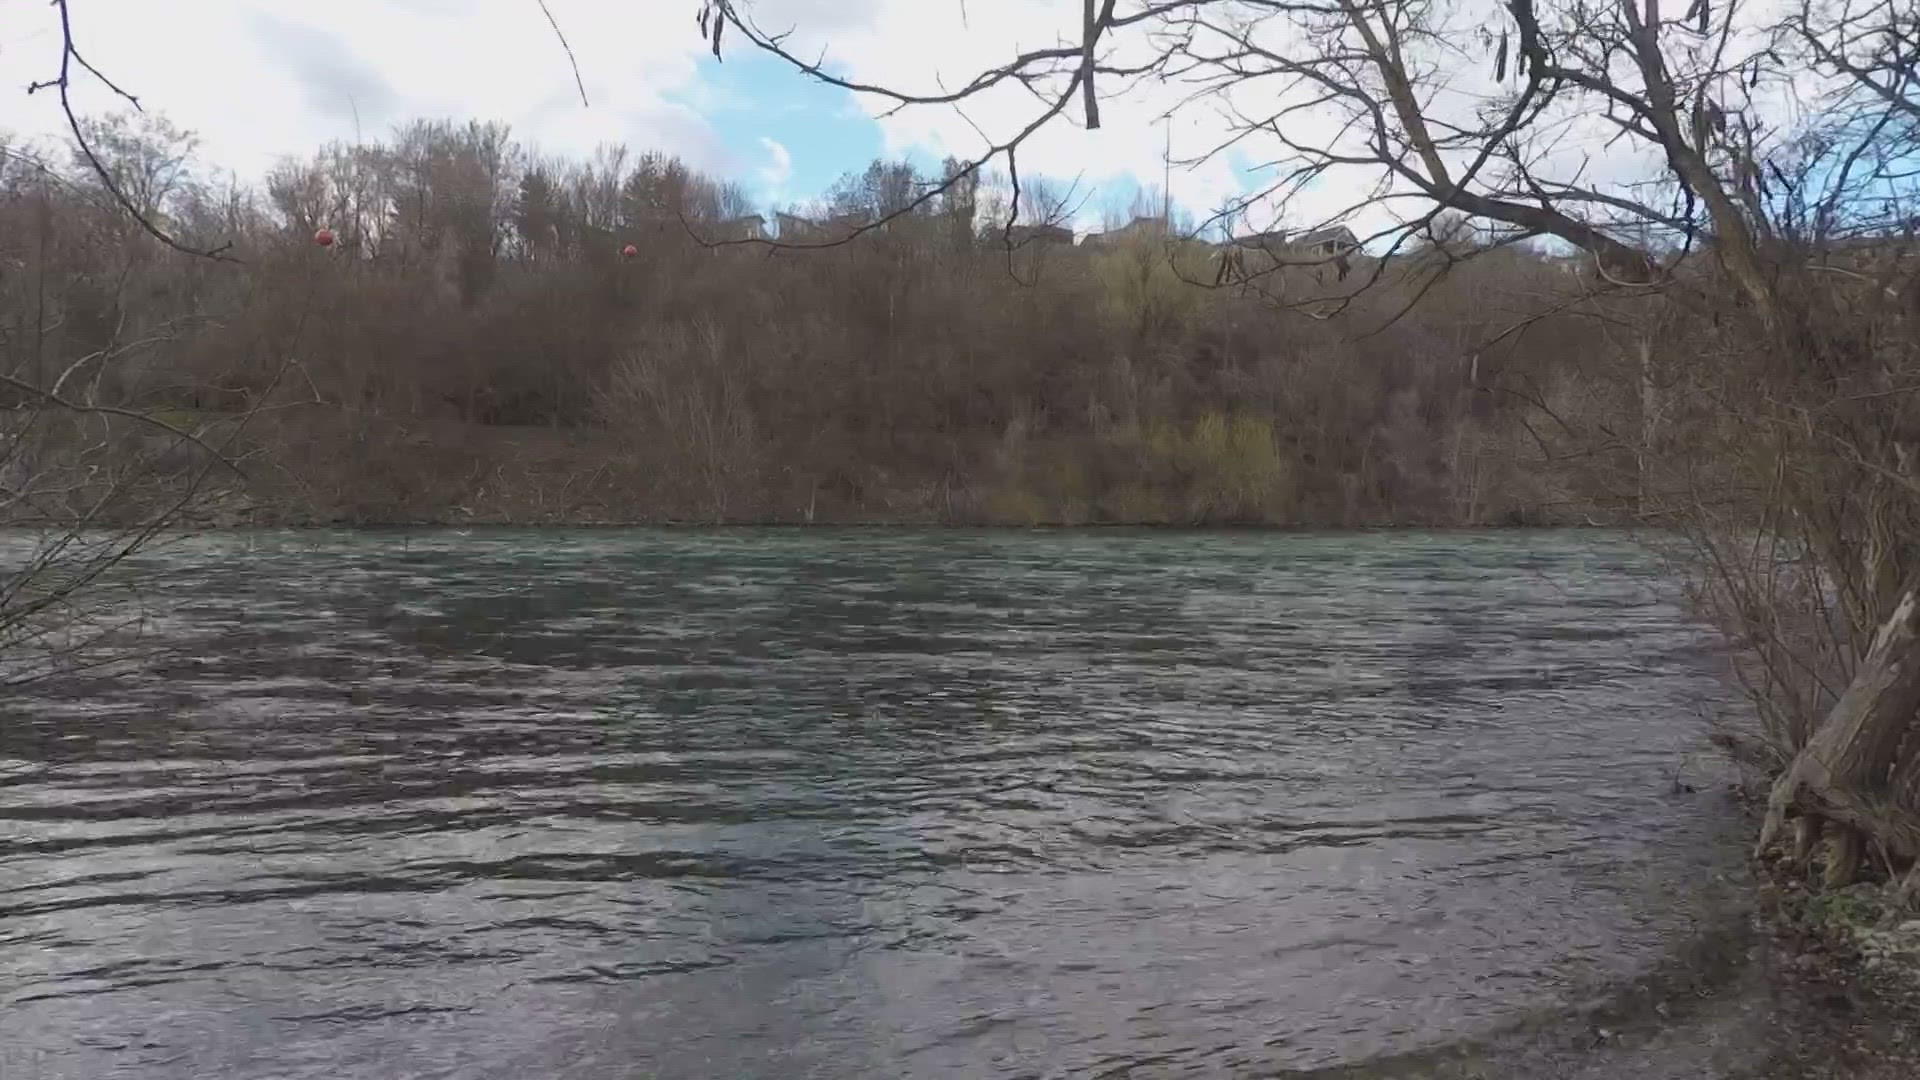 The city was awarded $6.7 million in settlement funds following the nearly eight-year legal battle with a company that reportedly contaminated the Spokane River.